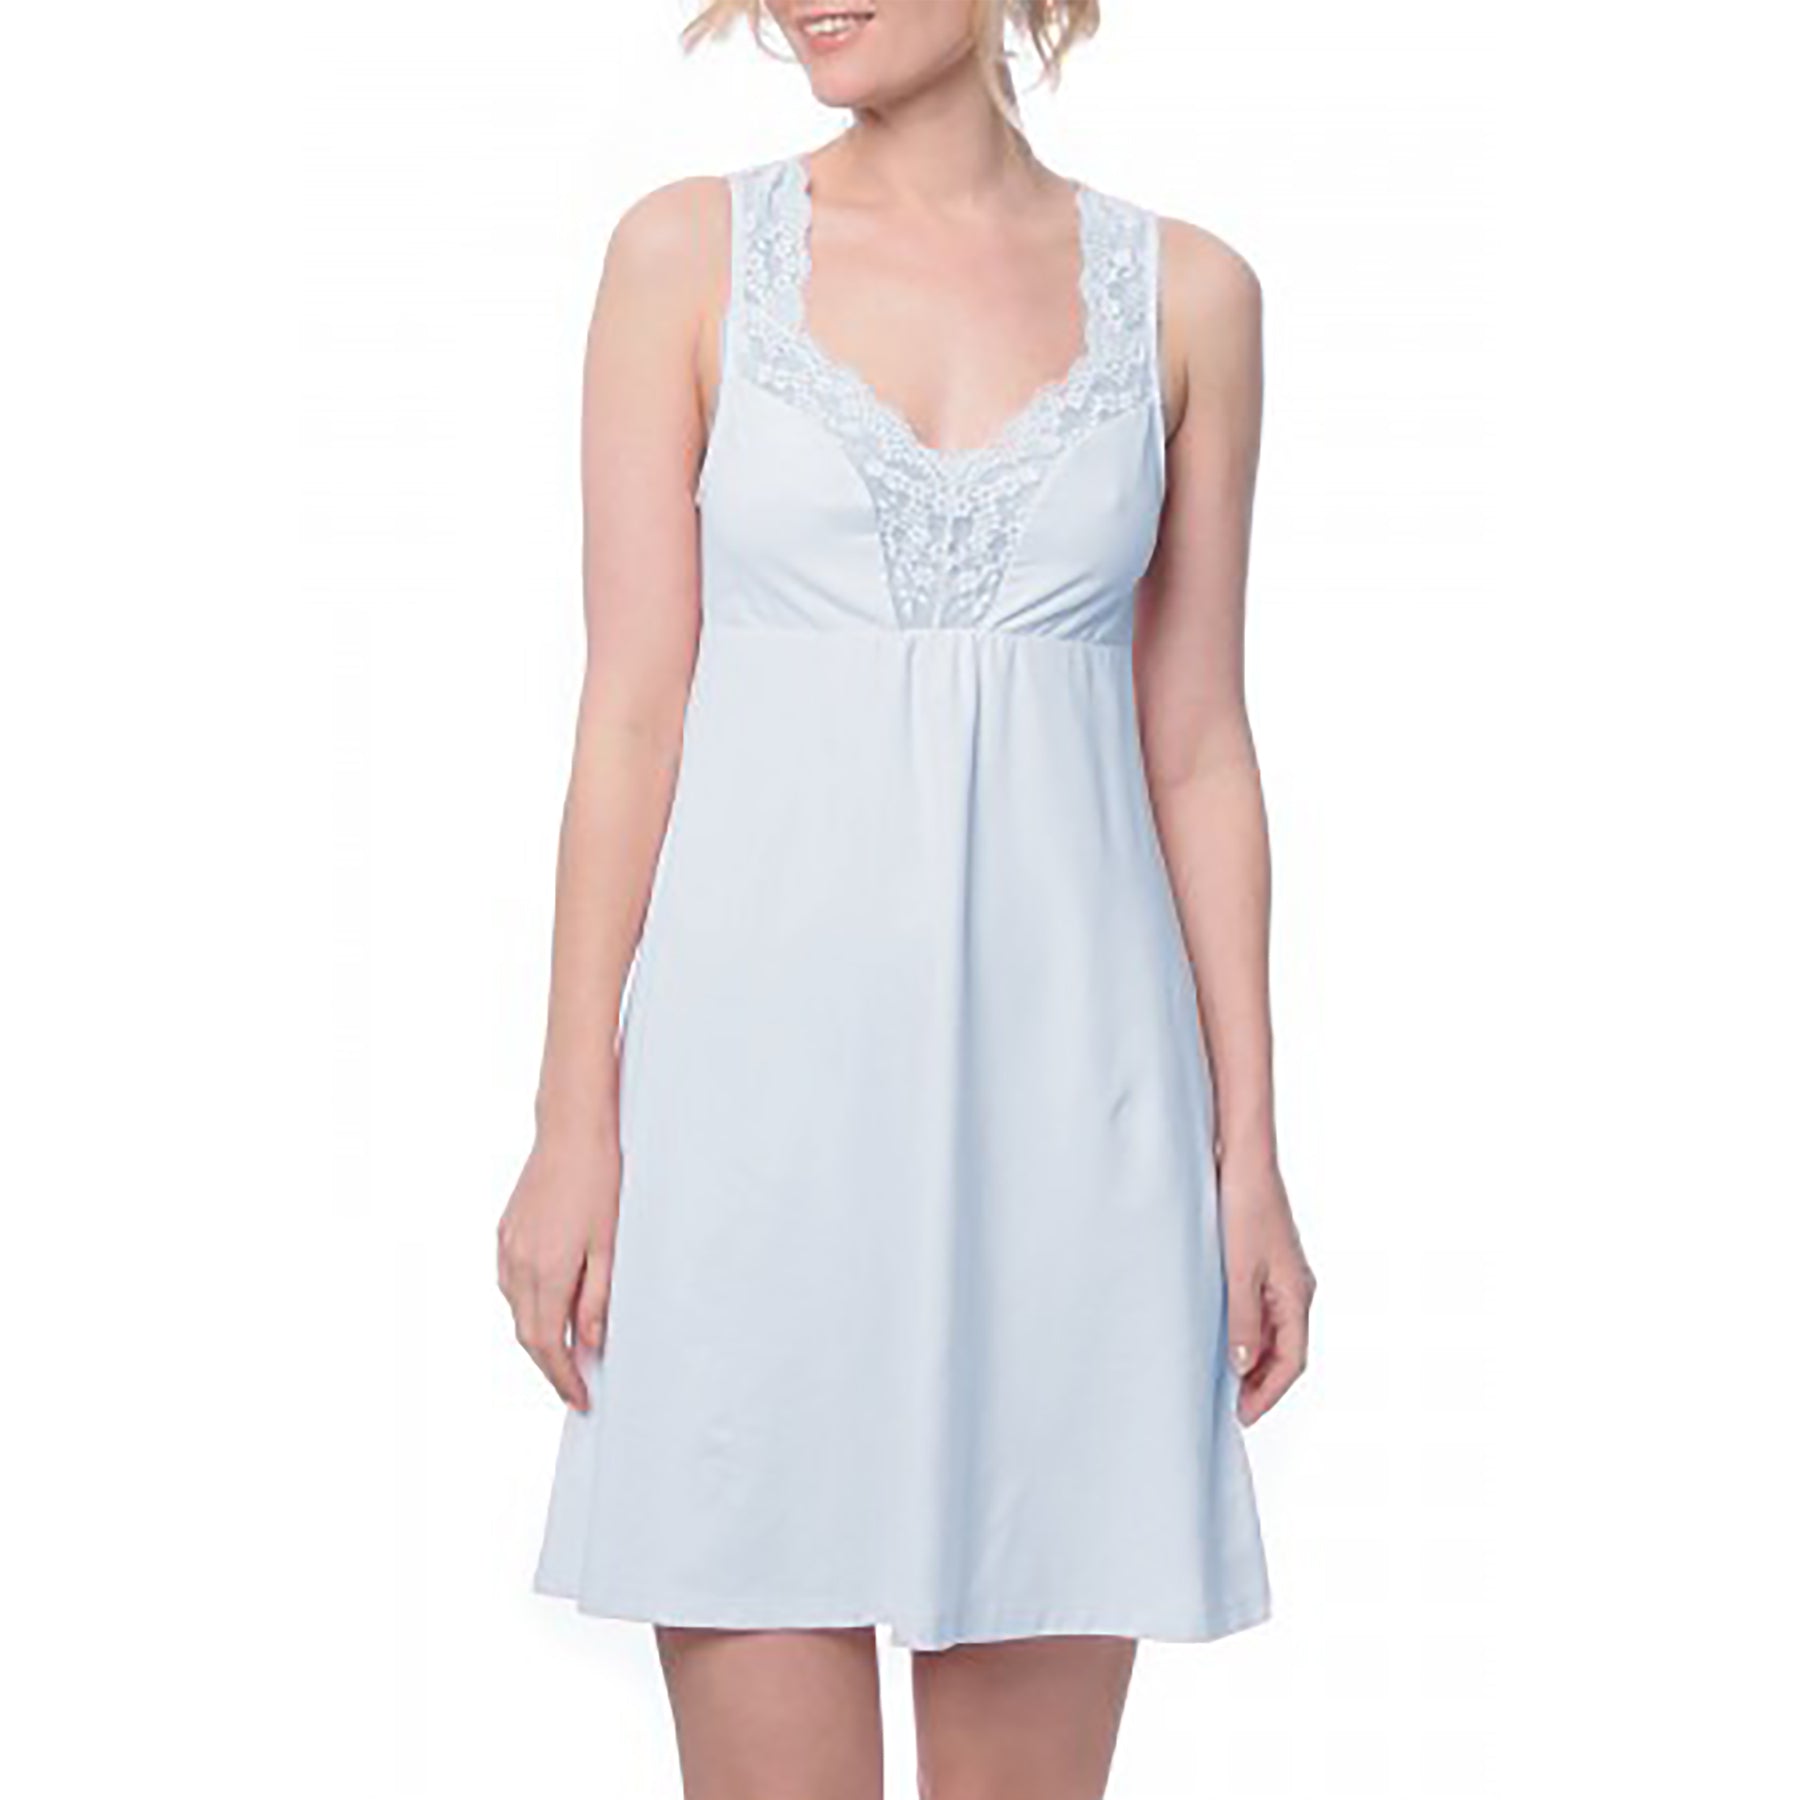 BT 554 CHEMISE NIGHTGOWN